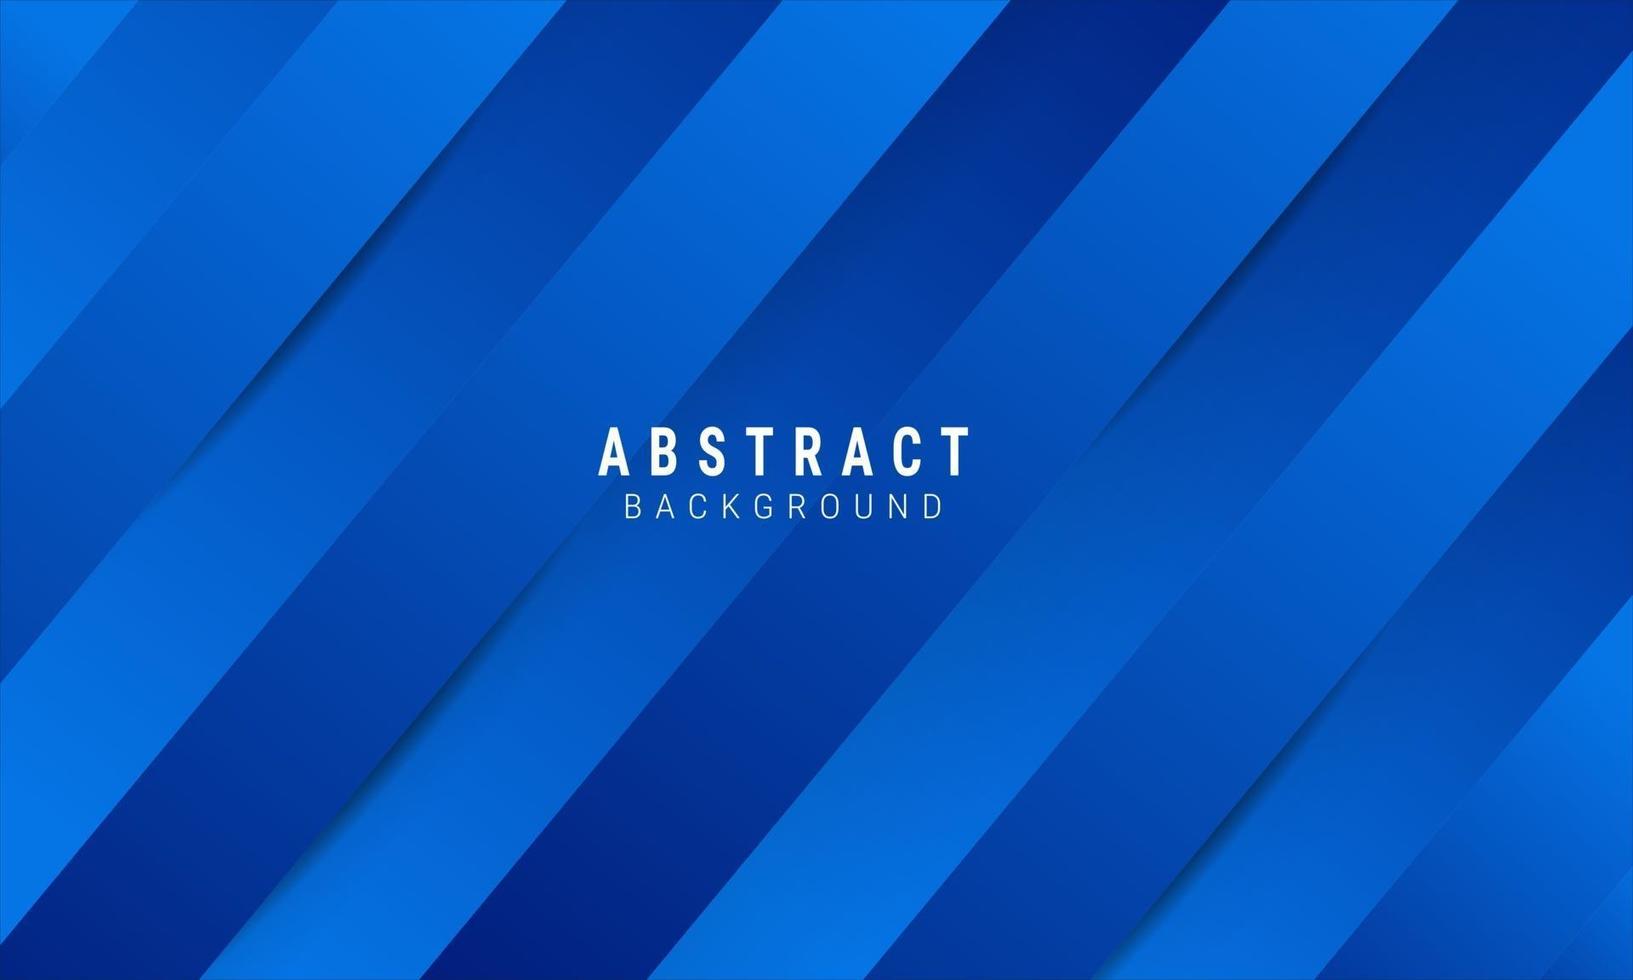 Blue black abstract background geometry shine and layer element vector